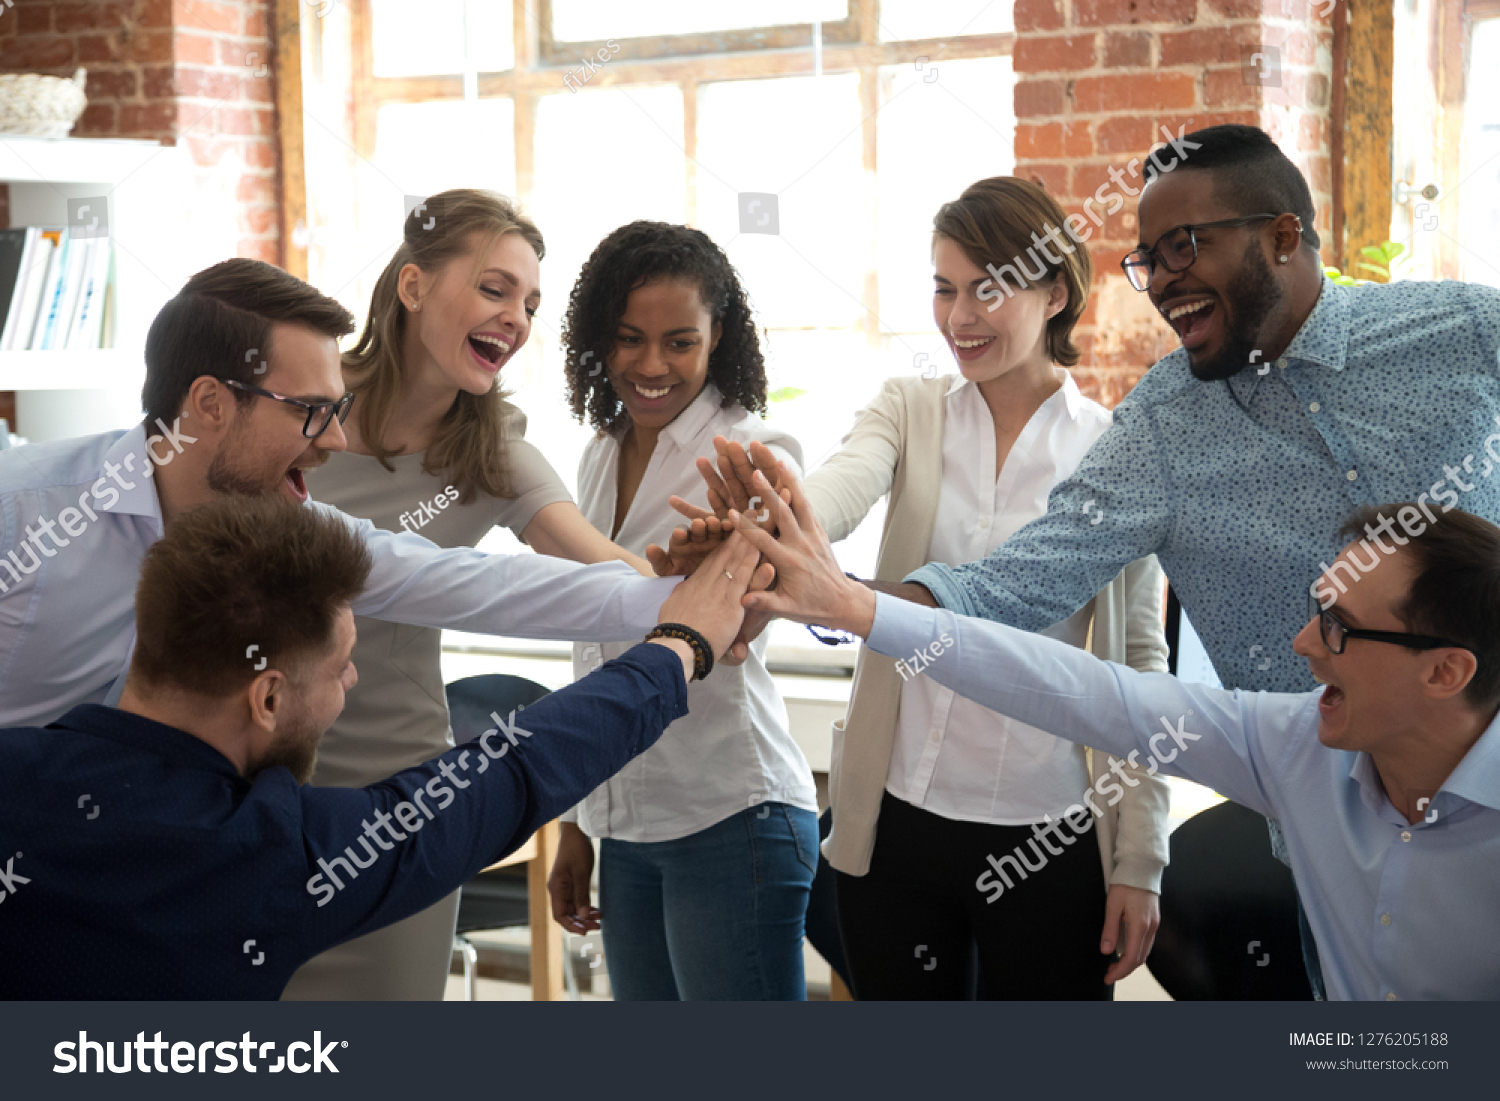 Happy diverse colleagues team people give high five together celebrate great teamwork result motivated by business success victory loyalty unity concept, good corporate relations and teambuilding #1276205188